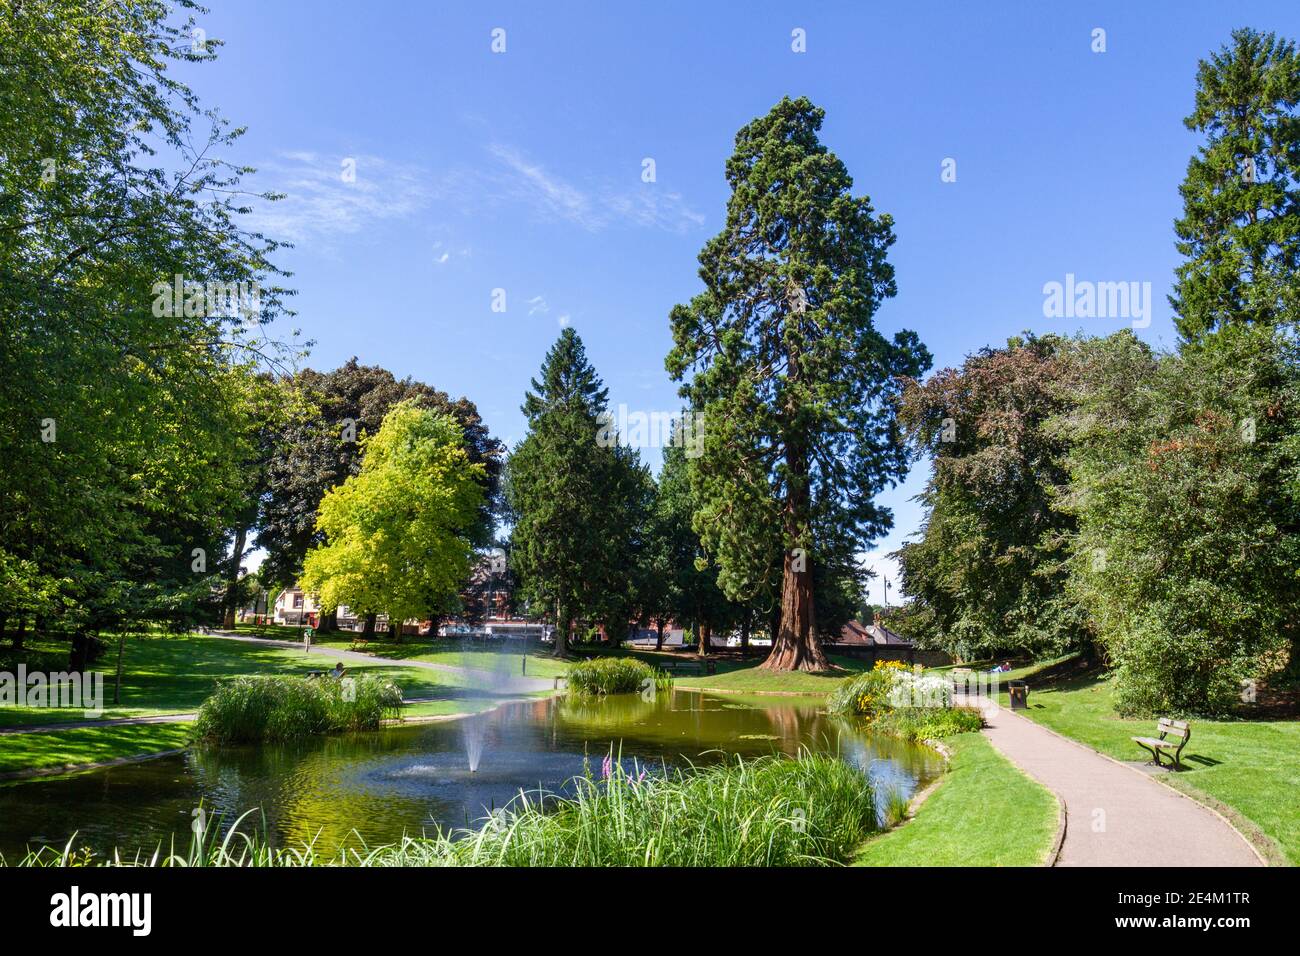 The Giant Redwood tree, planted by the Rothschild family in 1856, Tring Memorial Gardens, Tring, Hertfordshire, UK. Stock Photo